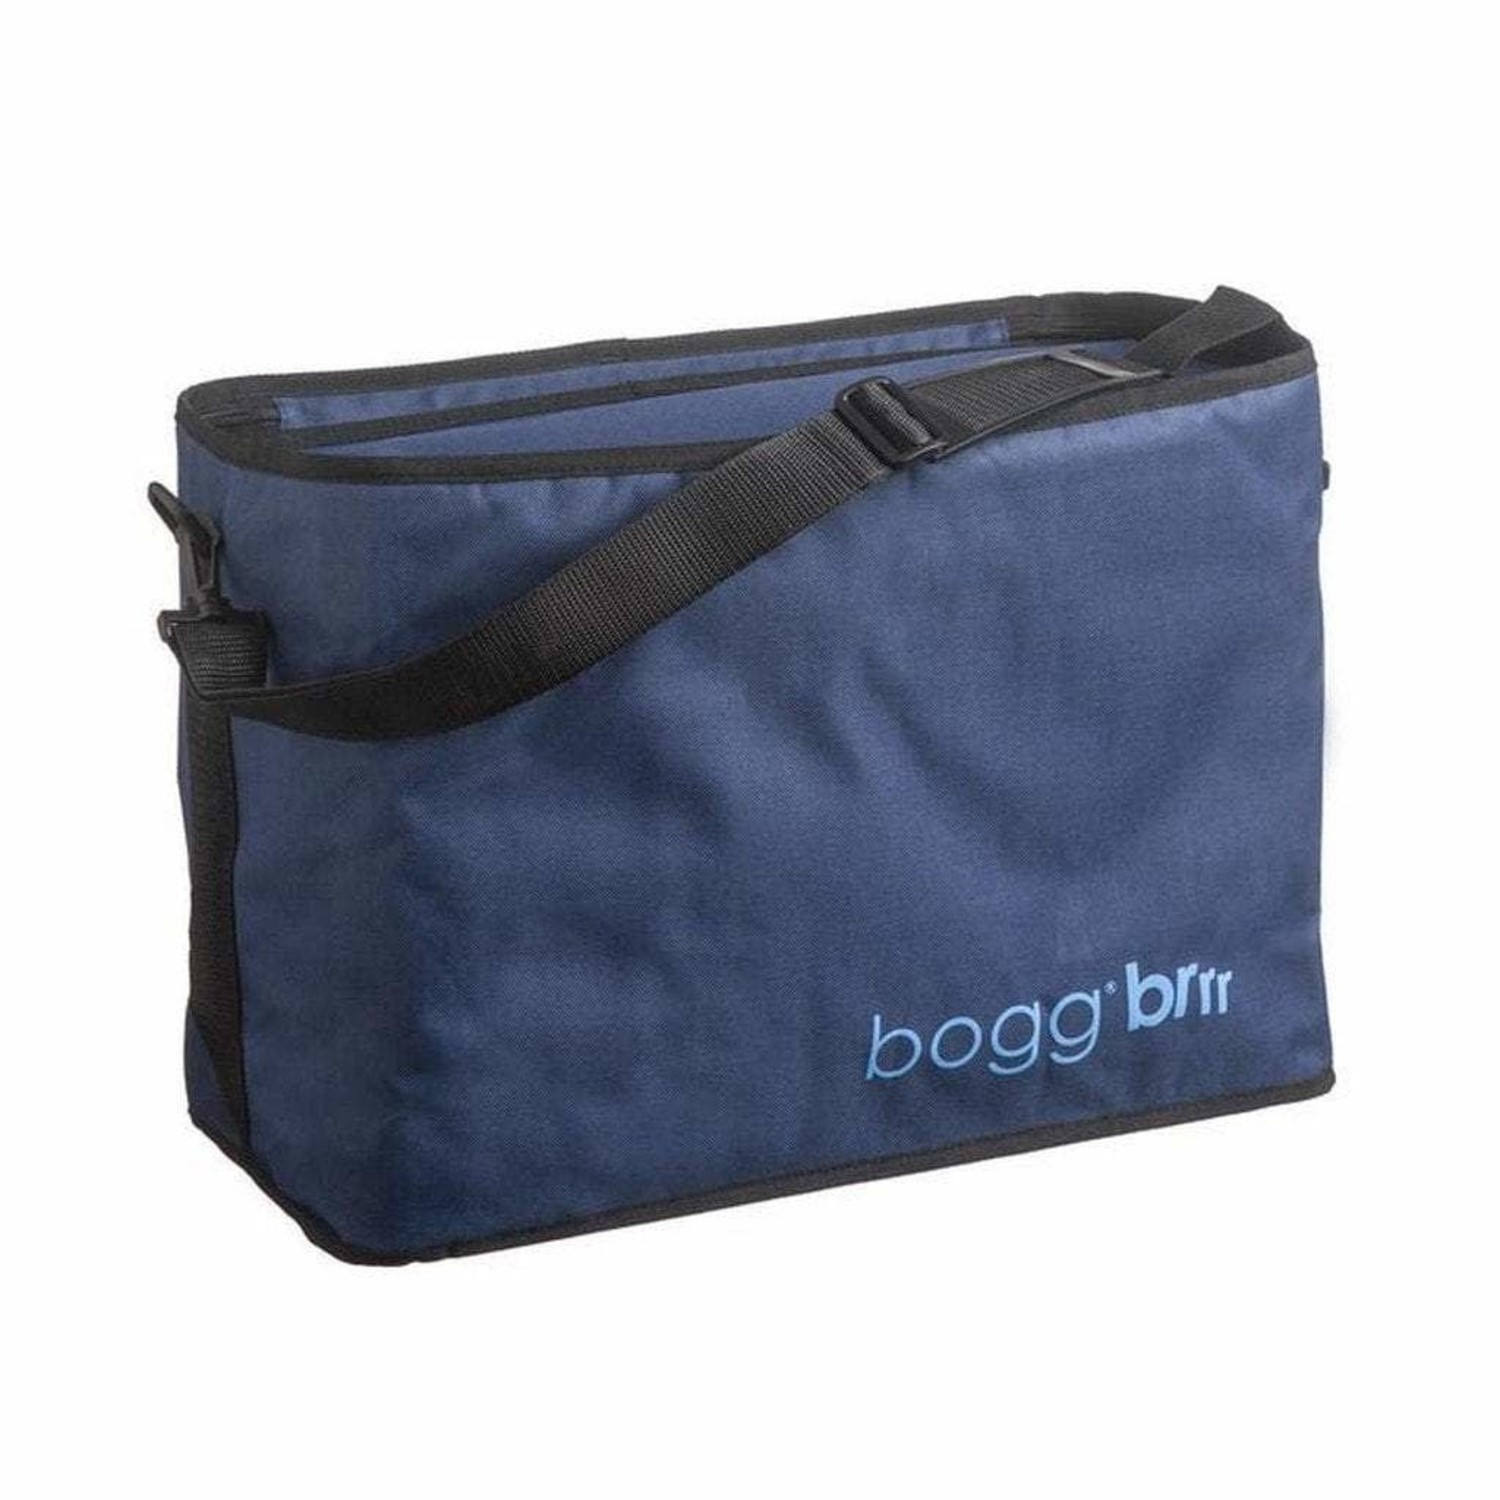 BOGG BAG Baby Bogg Brr - Amber Marie and Company